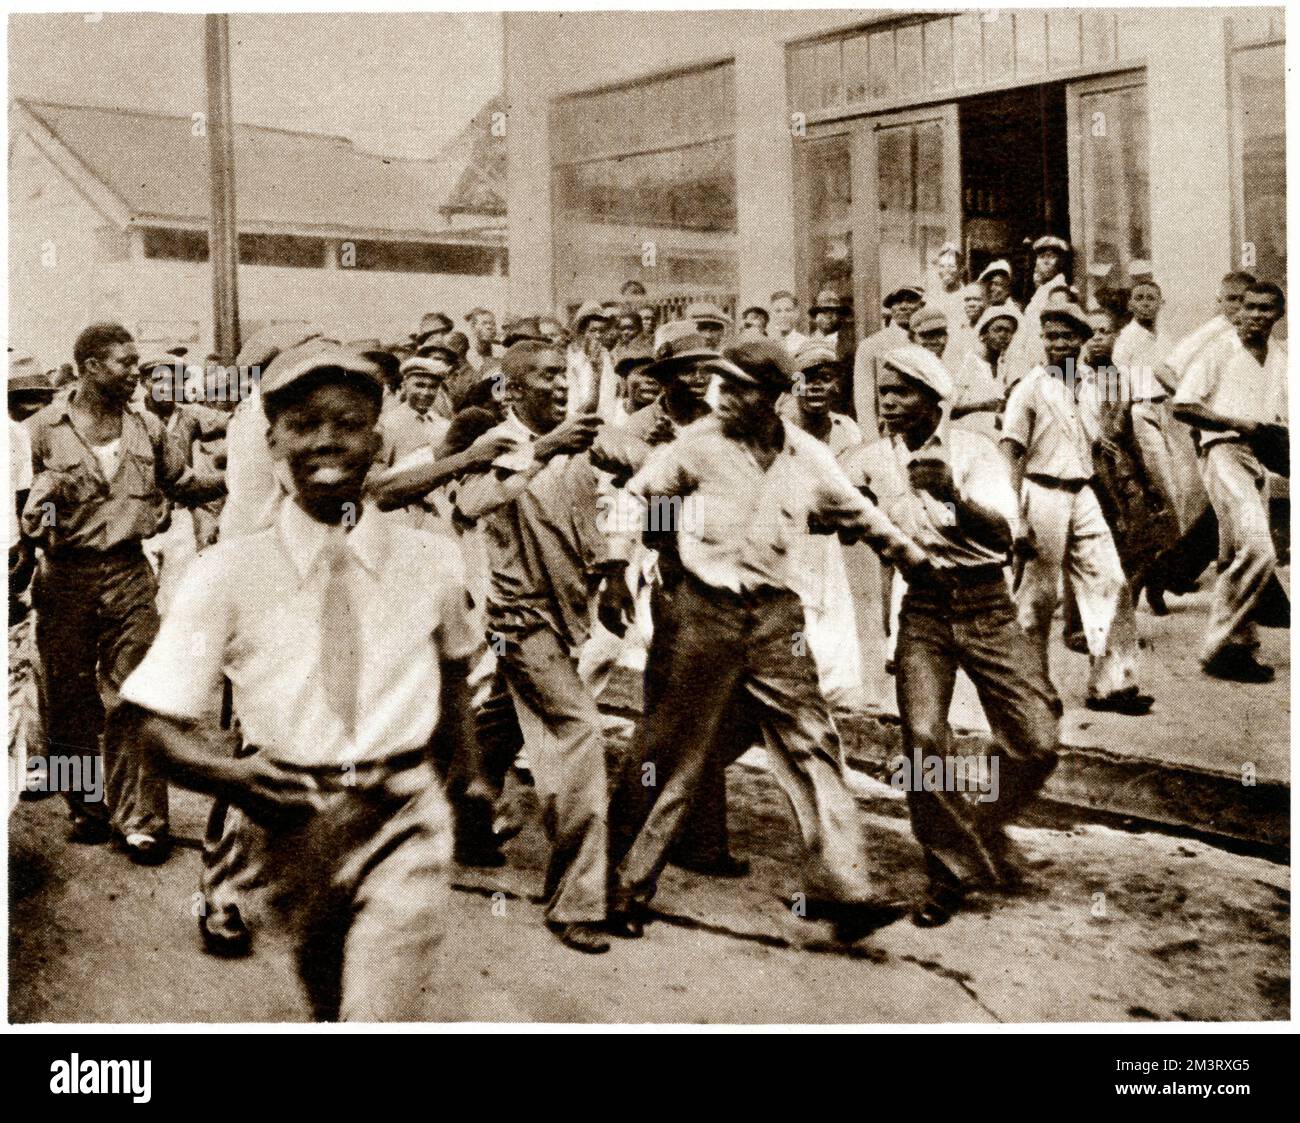 Riots in Jamaica in 1938 over a pay dispute.  Photograph shows a suspected blackleg, accused of intended strike-breaking in the docks,  being man-handled by other workers.     Date: 1938 Stock Photo